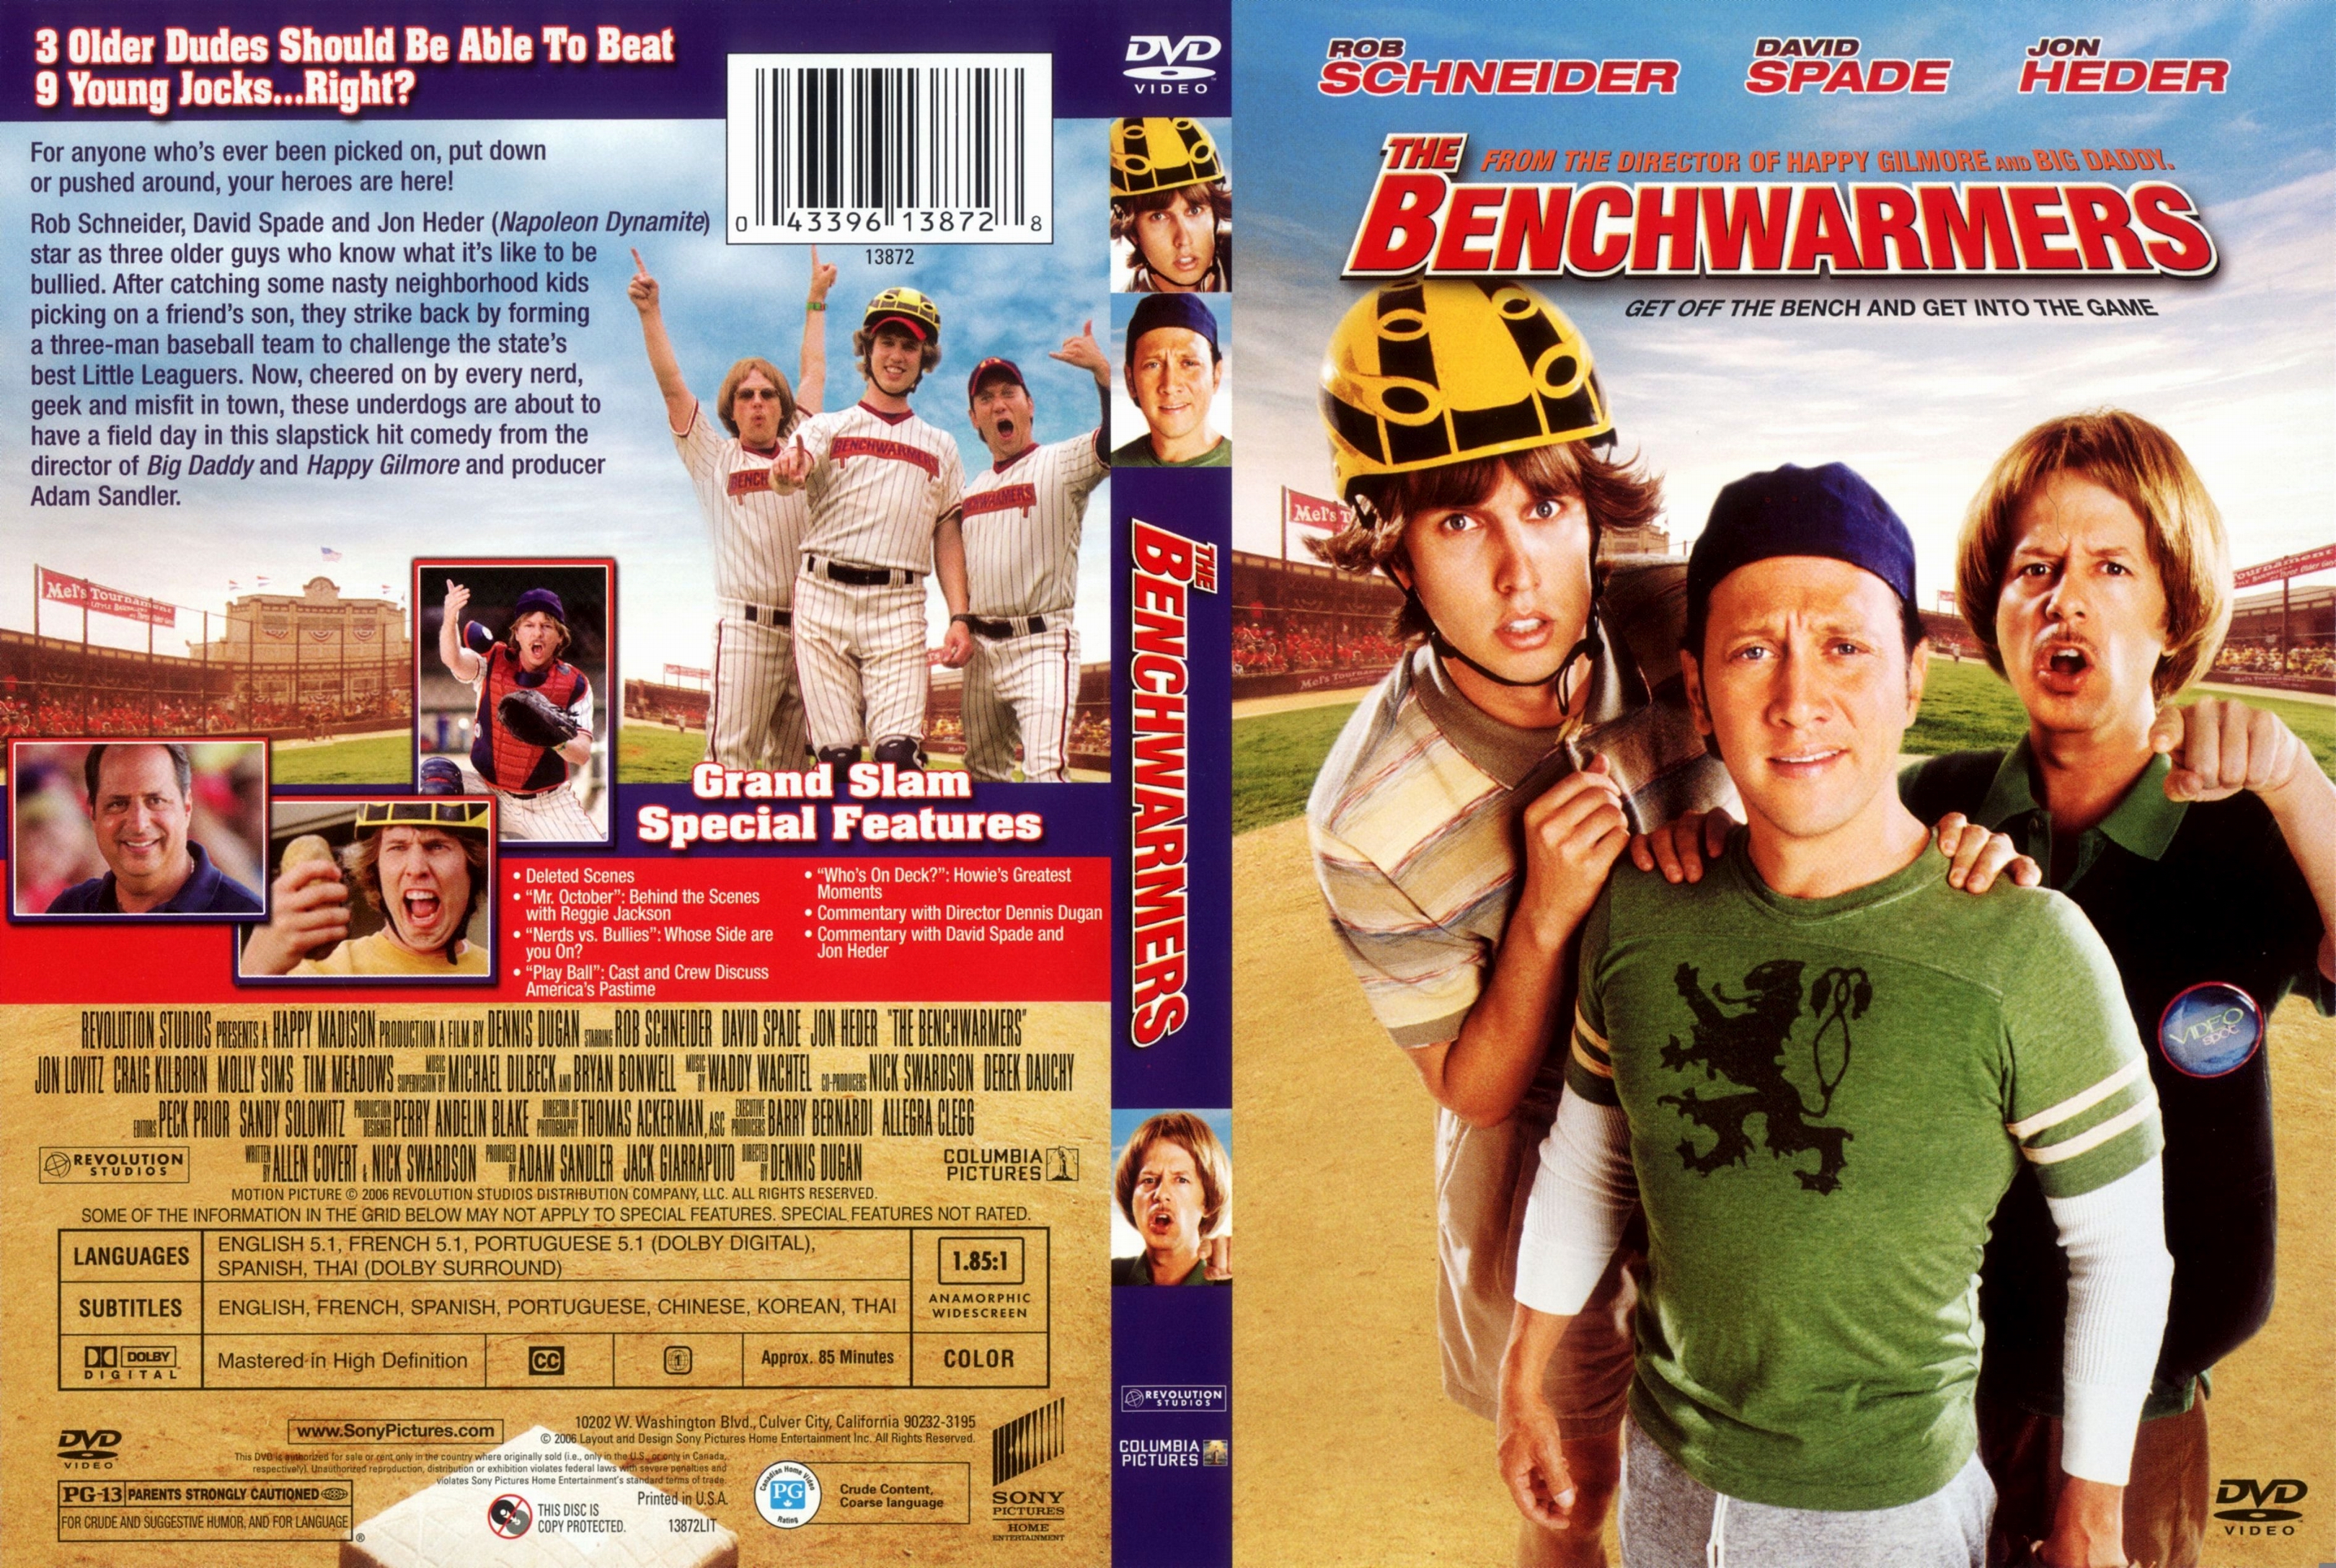 The Benchwarmers Dvd Covers Cover Century Over 500000 Album Art Covers For Free